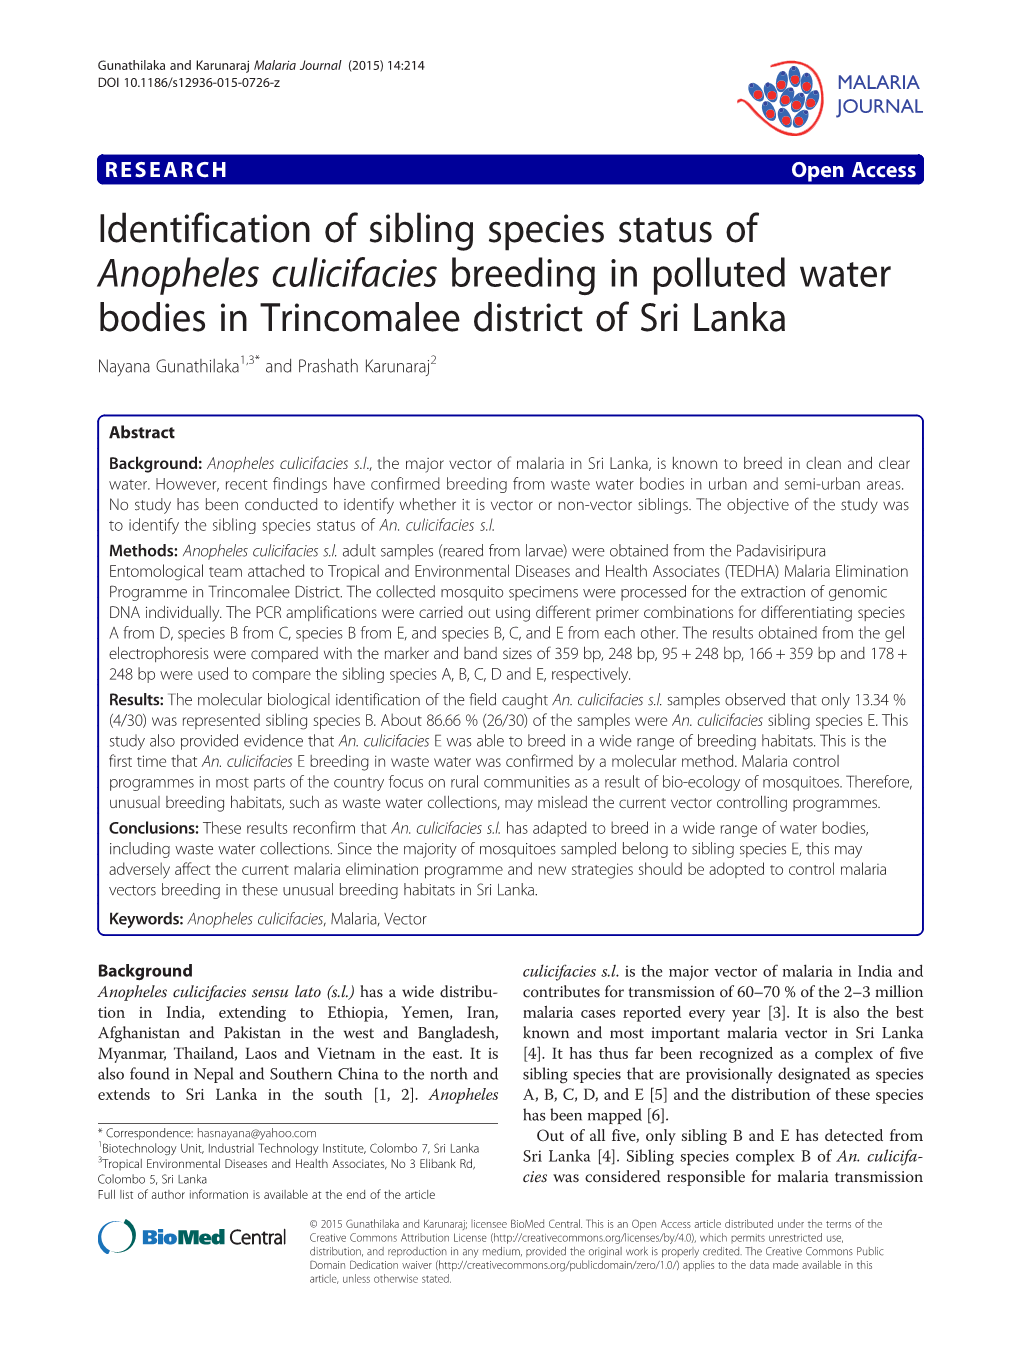 Identification of Sibling Species Status of Anopheles Culicifacies Breeding